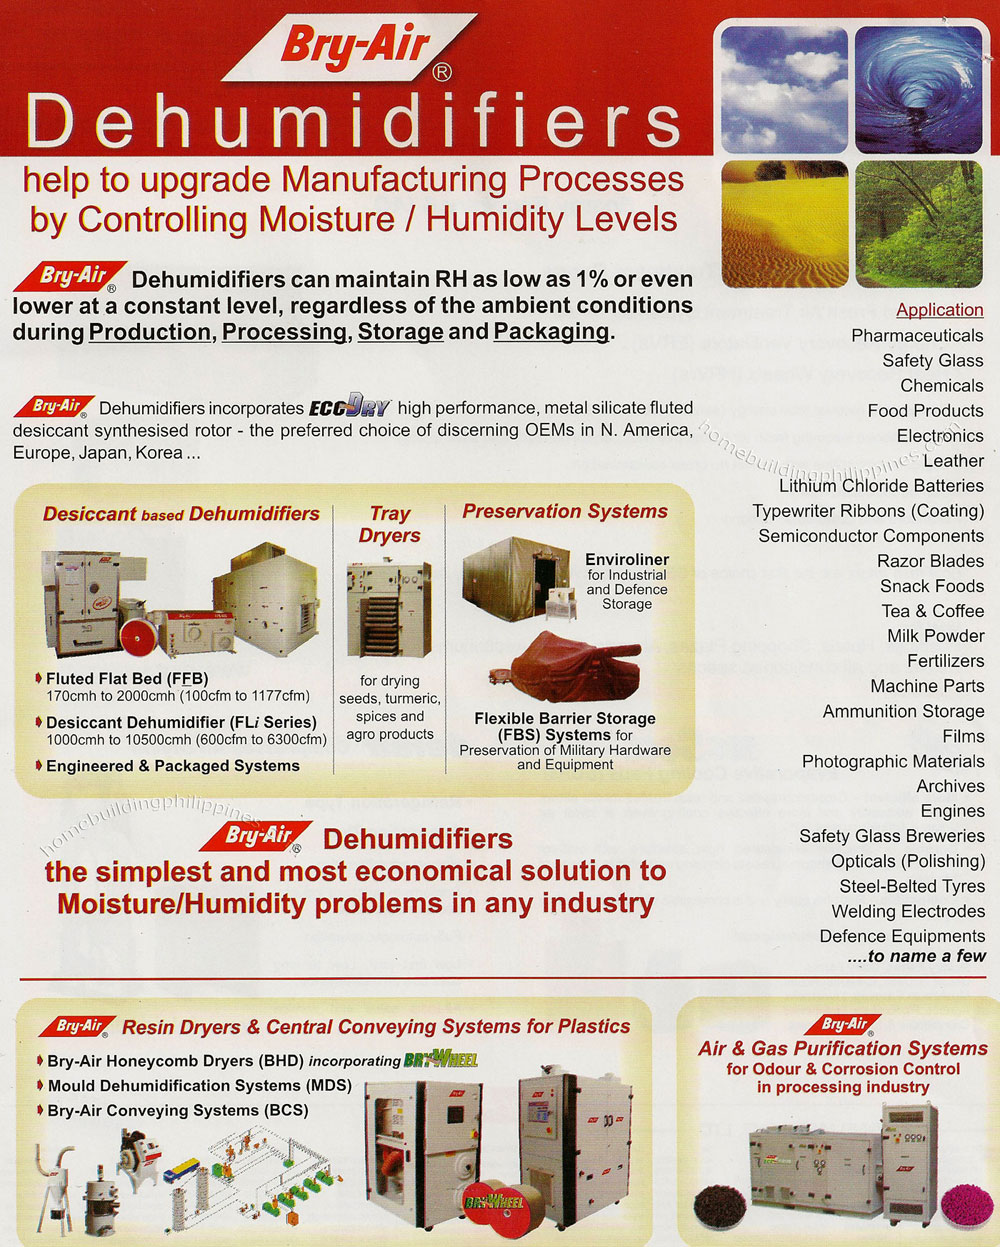 Bry-Air Dehumidifiers, Preservation Systems, Resin Dryers, Conveying Systems, Air and Gas Purification Systems